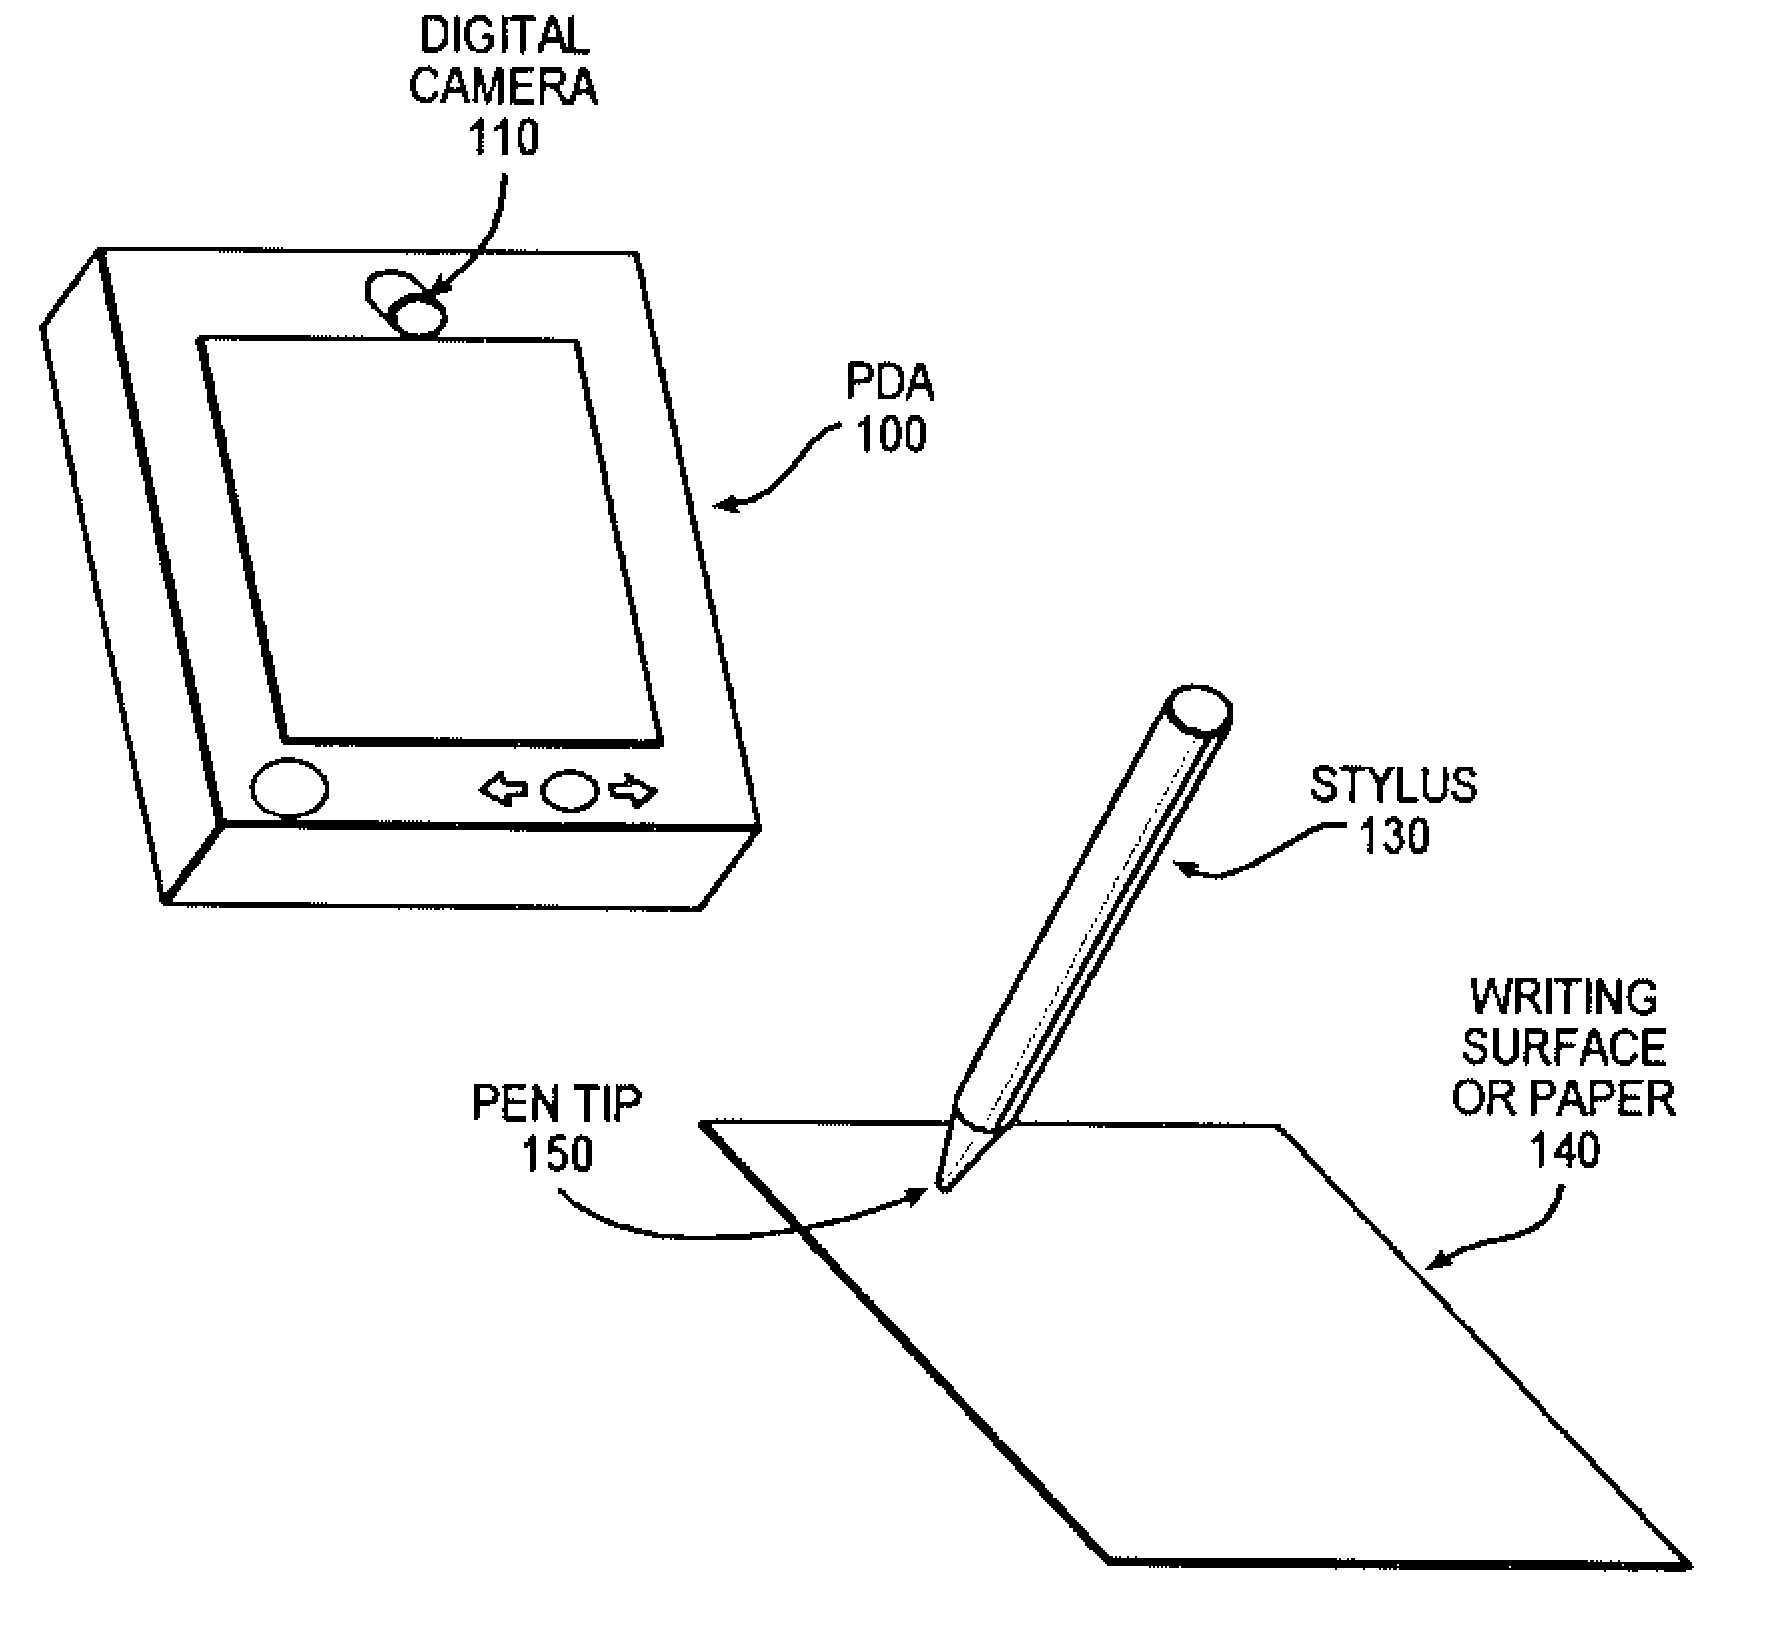 Video-based biometric signature data collecting method and apparatus